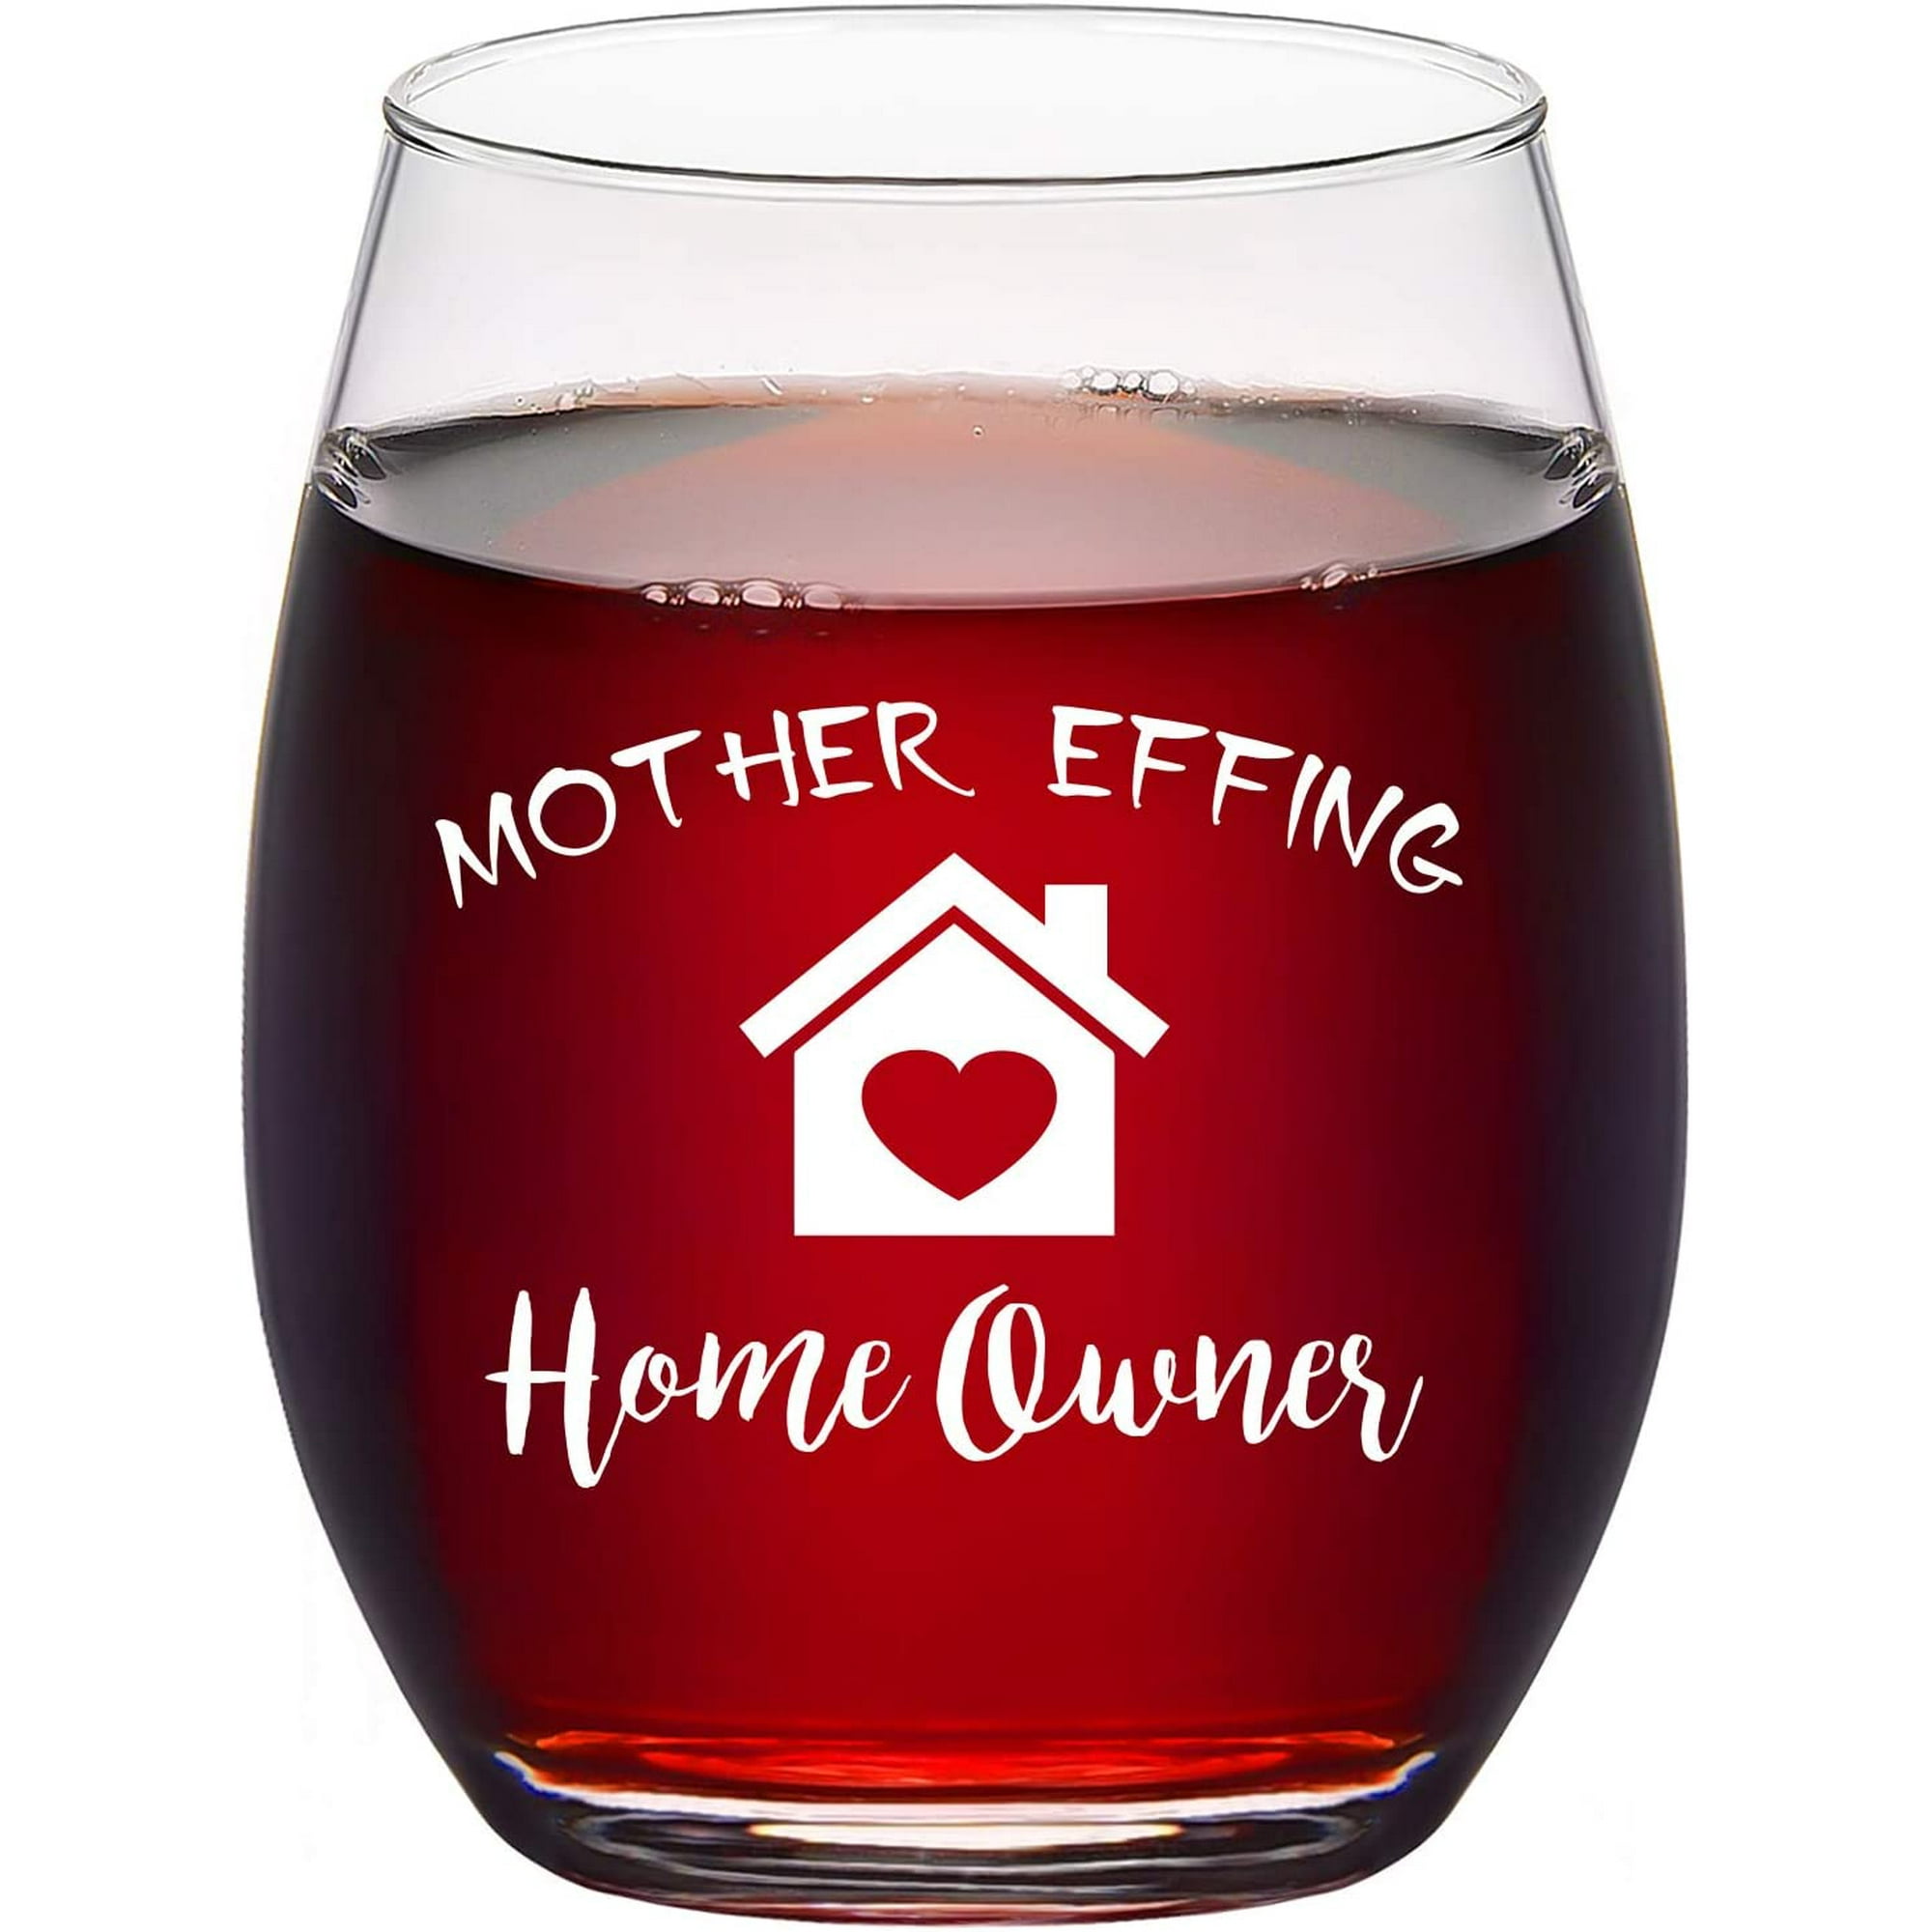 Housewarming Gifts, Mother Effing Homeowner Stemless Wine Glass, Gift Idea  for New Home Friend Women Men First Time Home Owner Christmas Mother's Day, Funny  Housewarming Presents, 15Oz | Walmart Canada